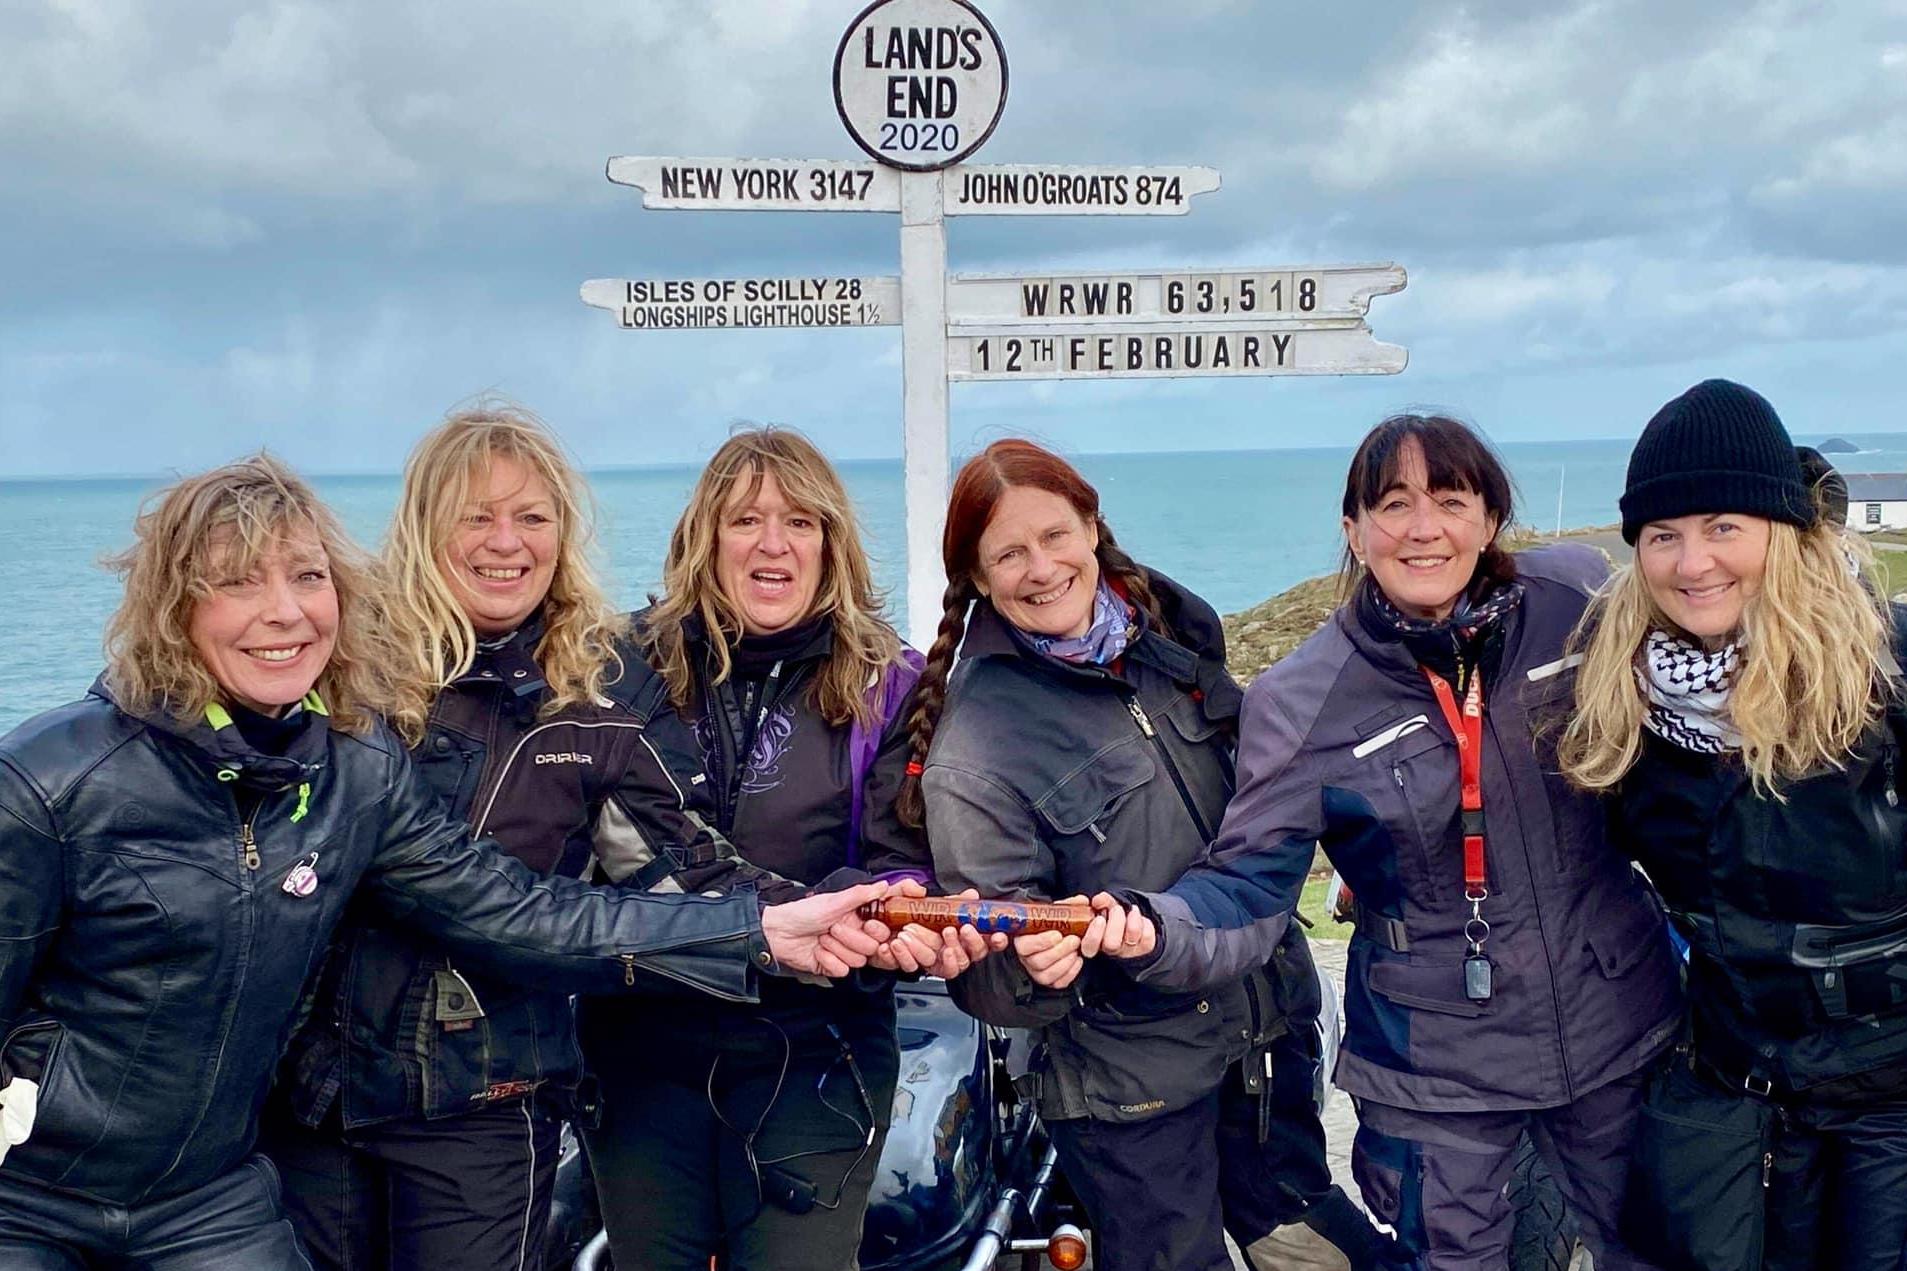 Some of the relay’s British gang can be seen at Land’s End